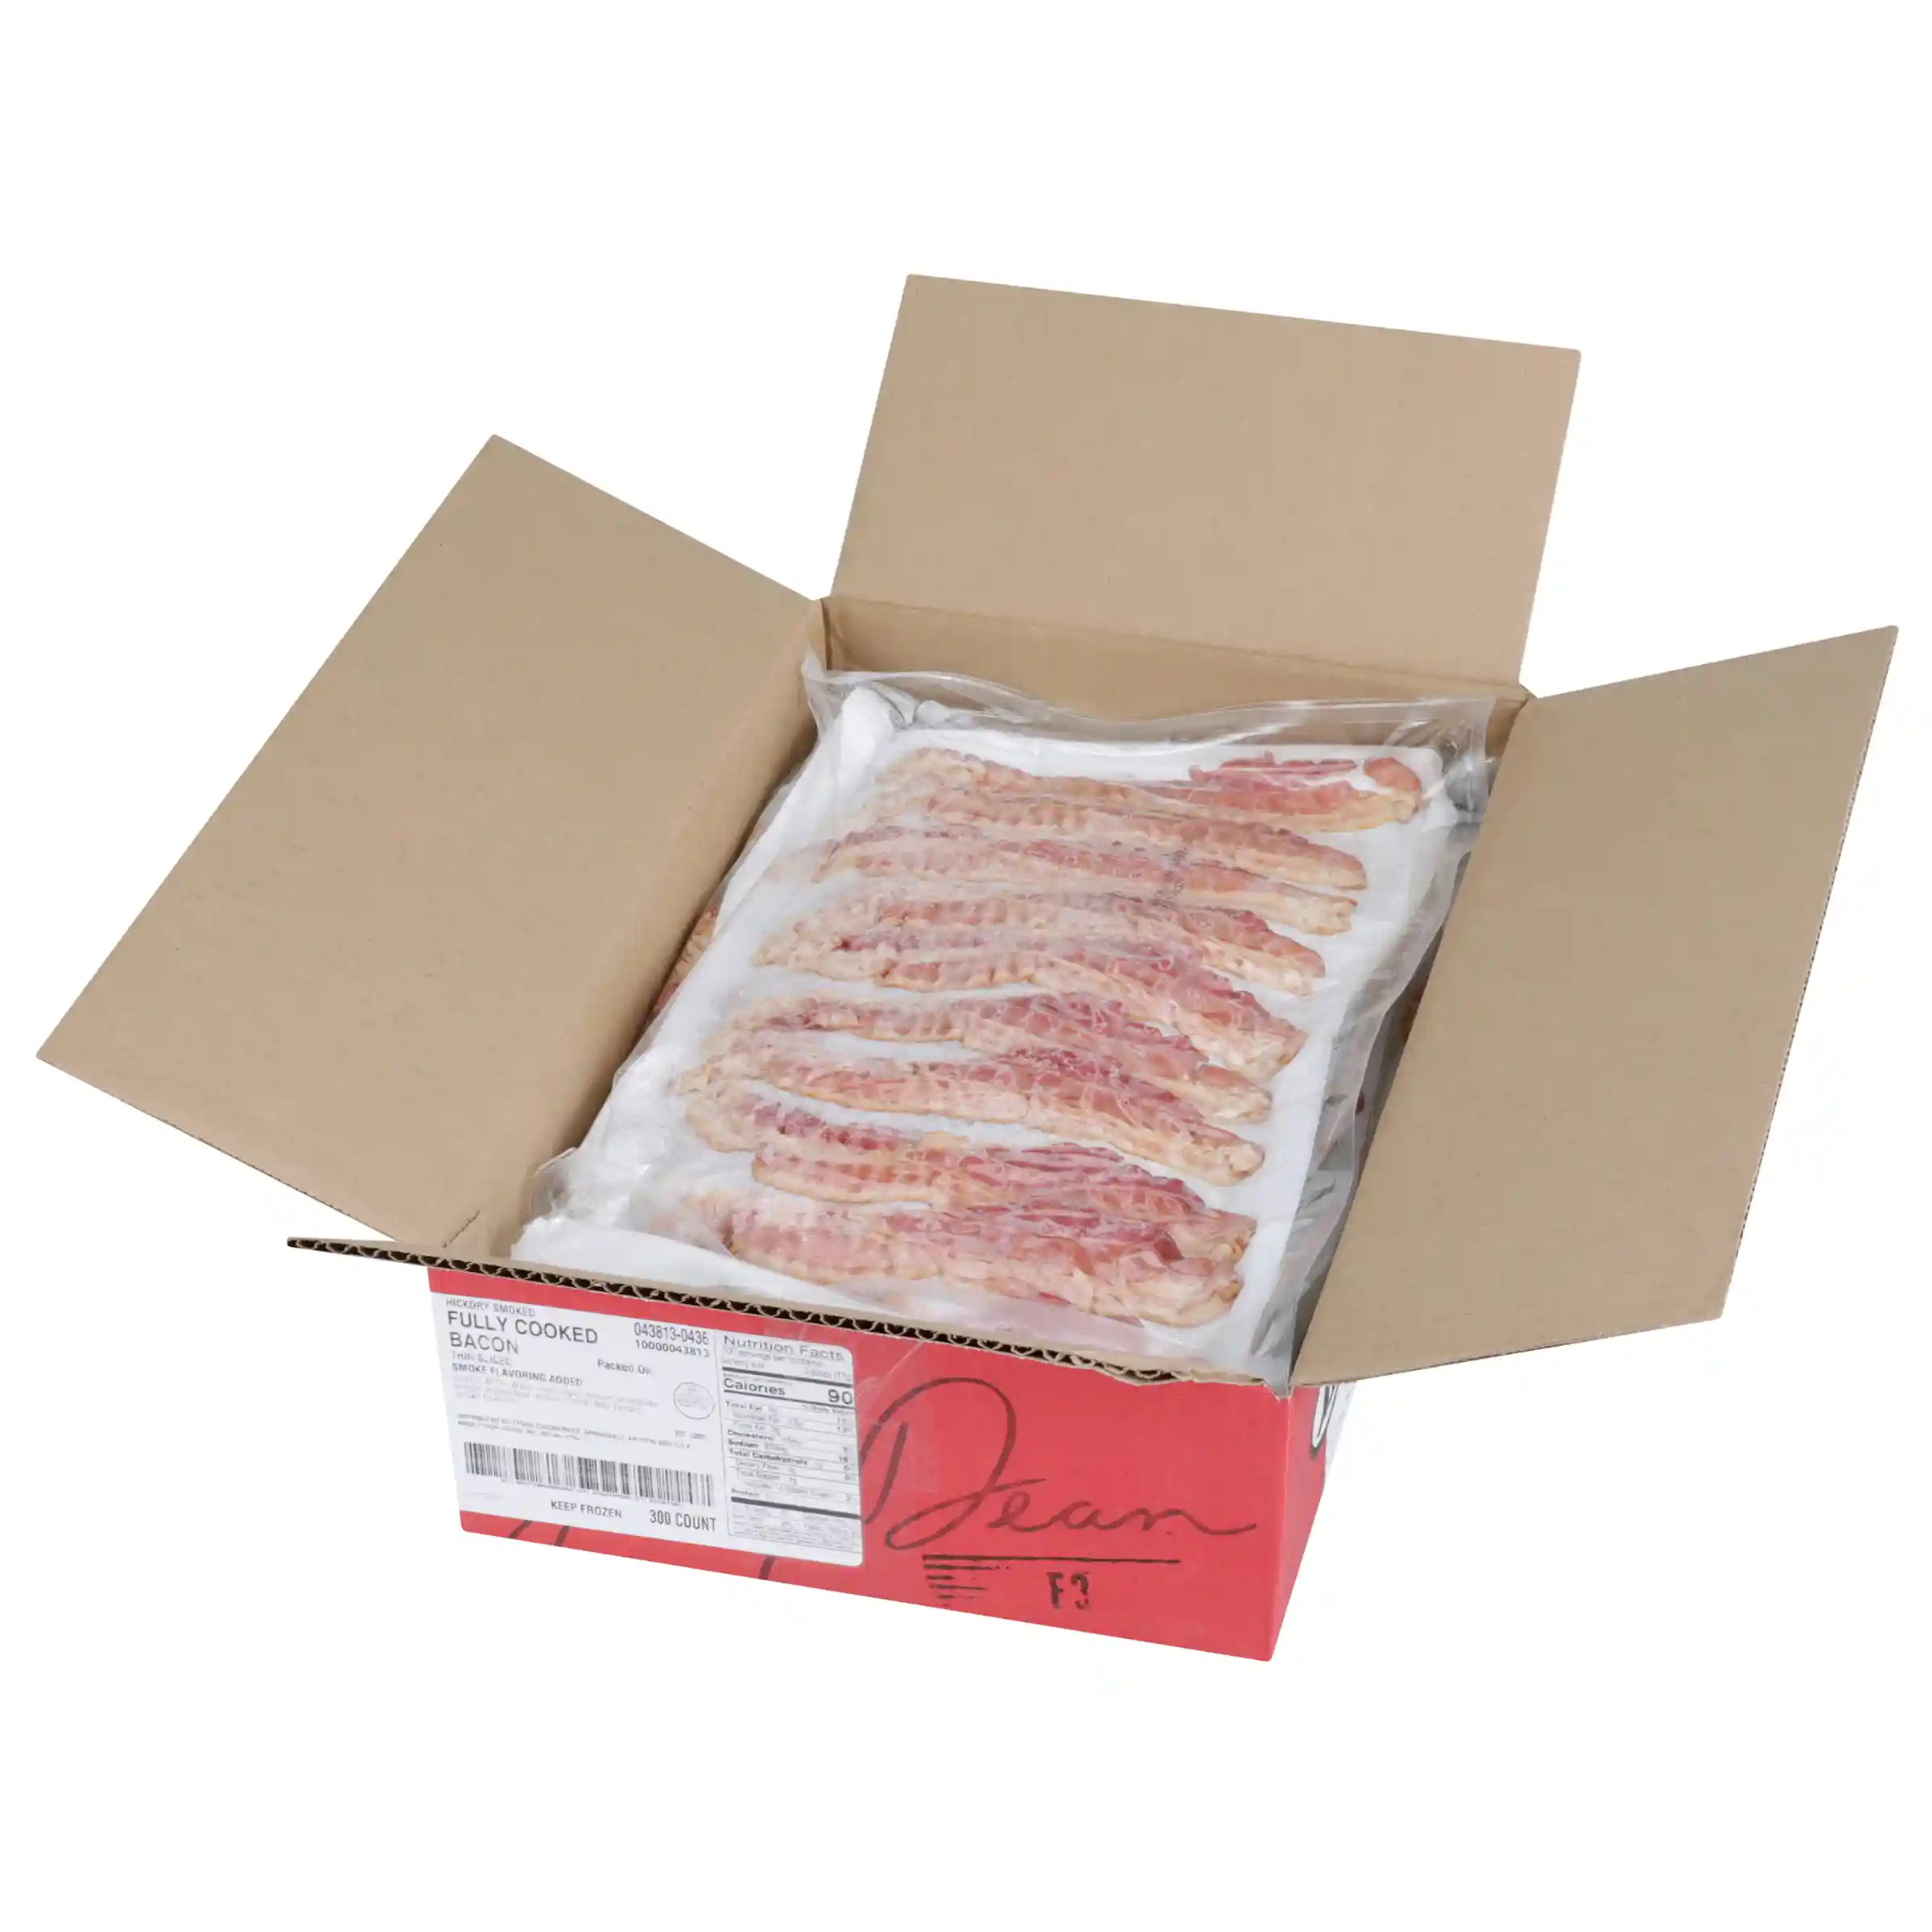 Jimmy Dean® Fully Cooked Hickory Smoked Thin Bacon Slices_image_41